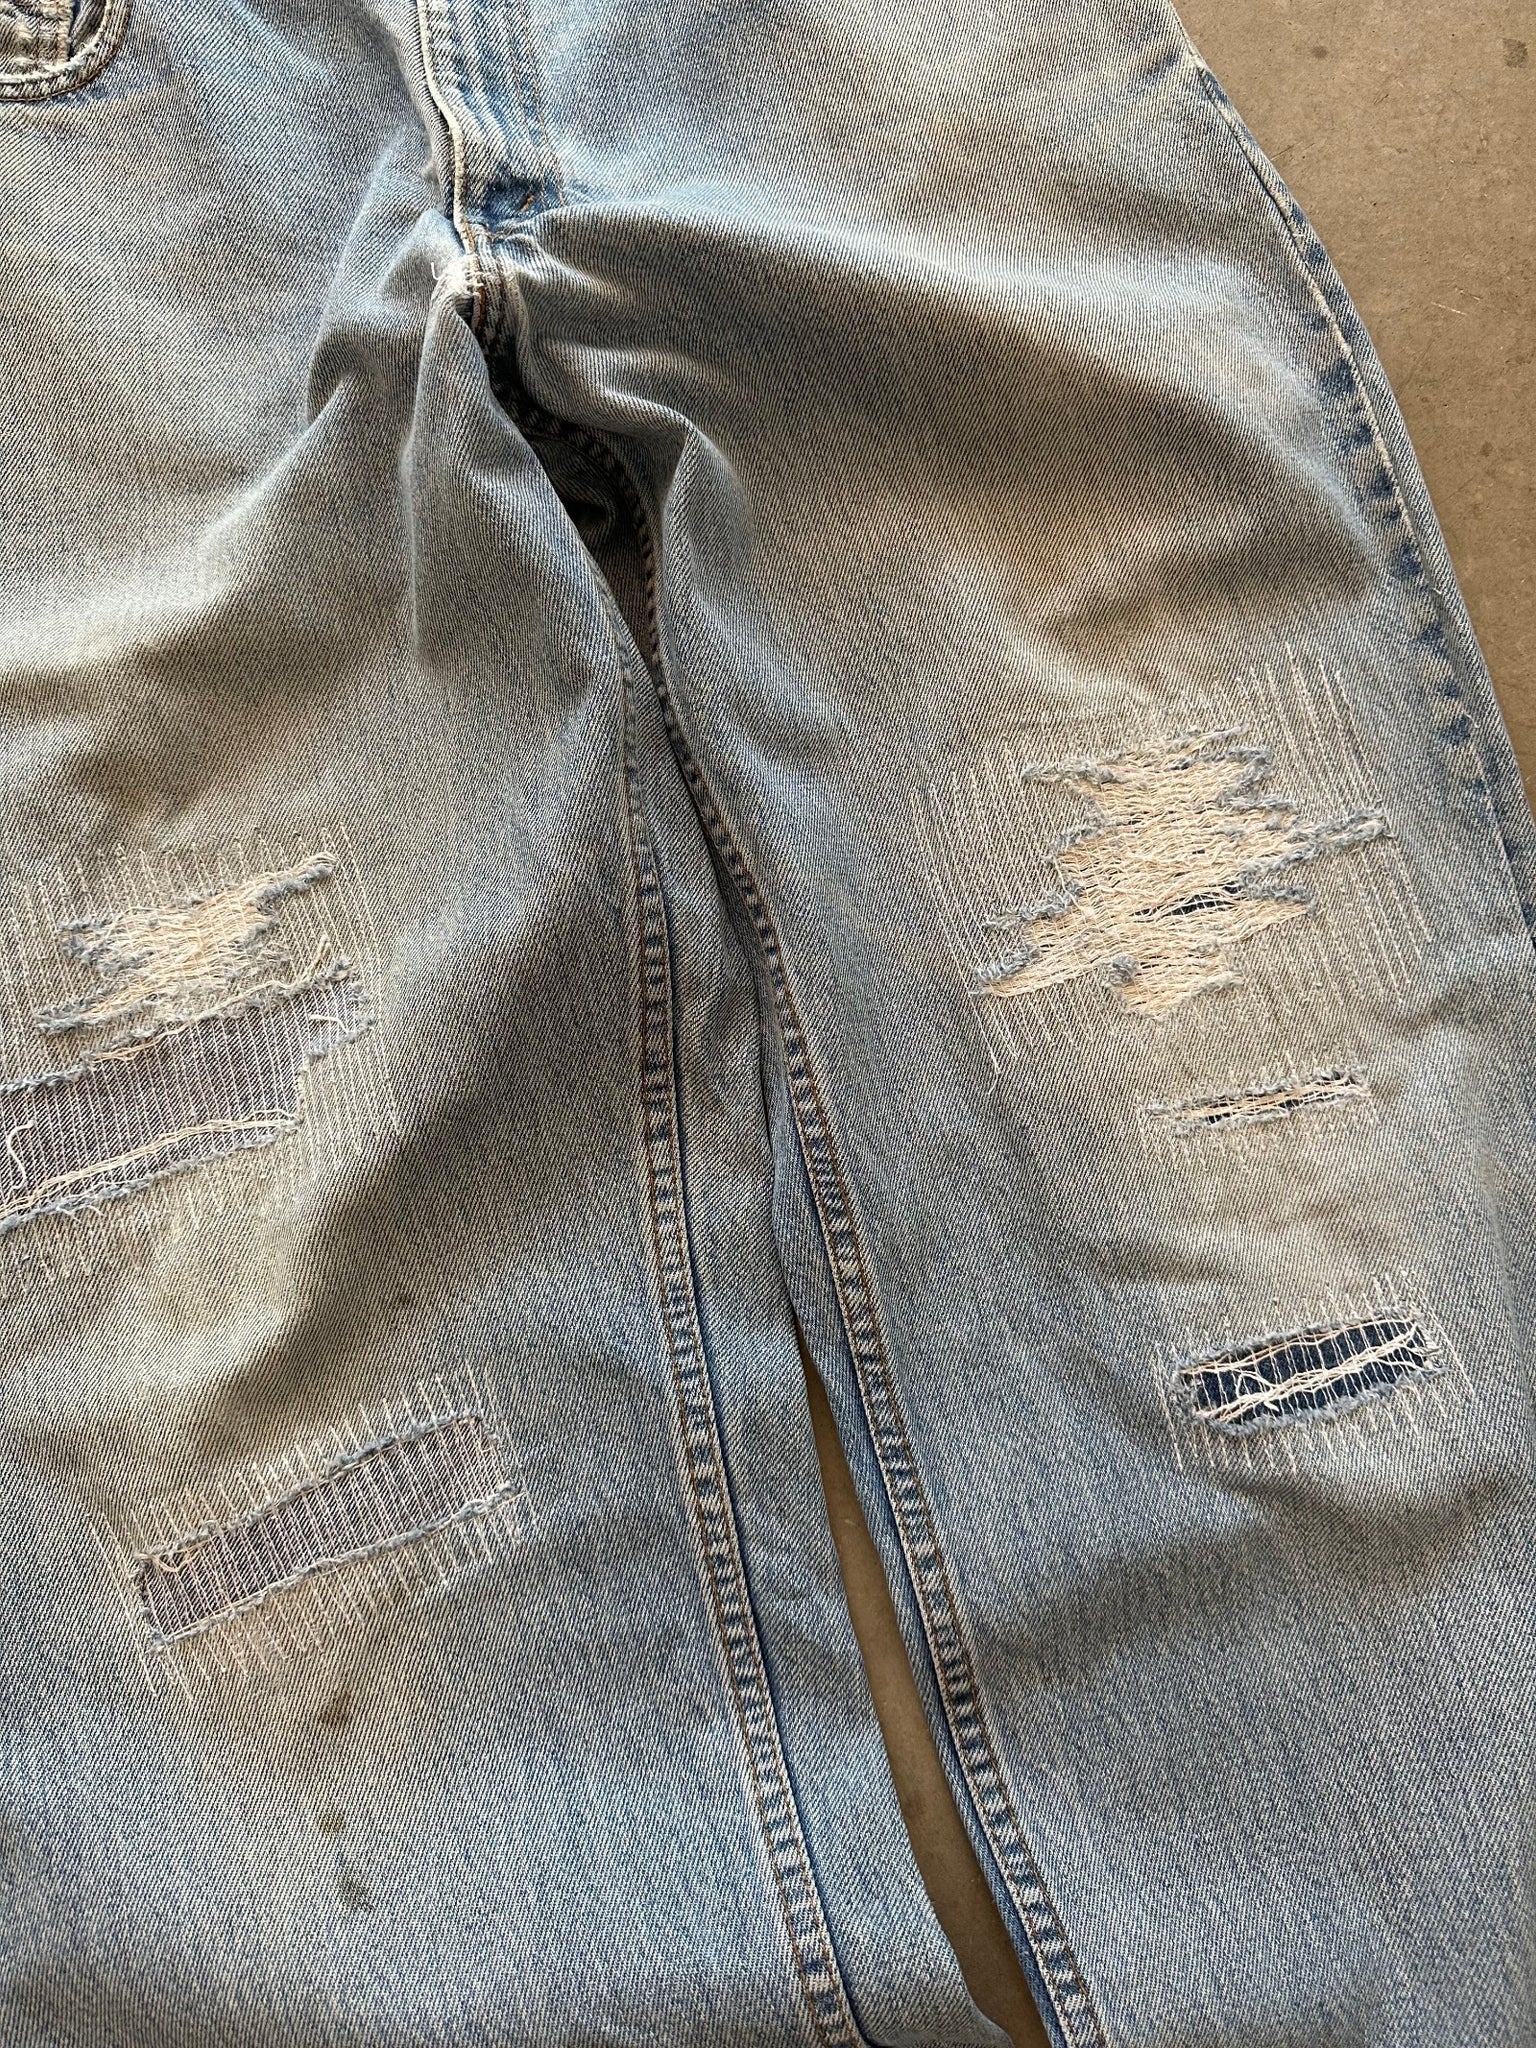 1990's Levi's 560 Repaired Jeans - 34 x 32